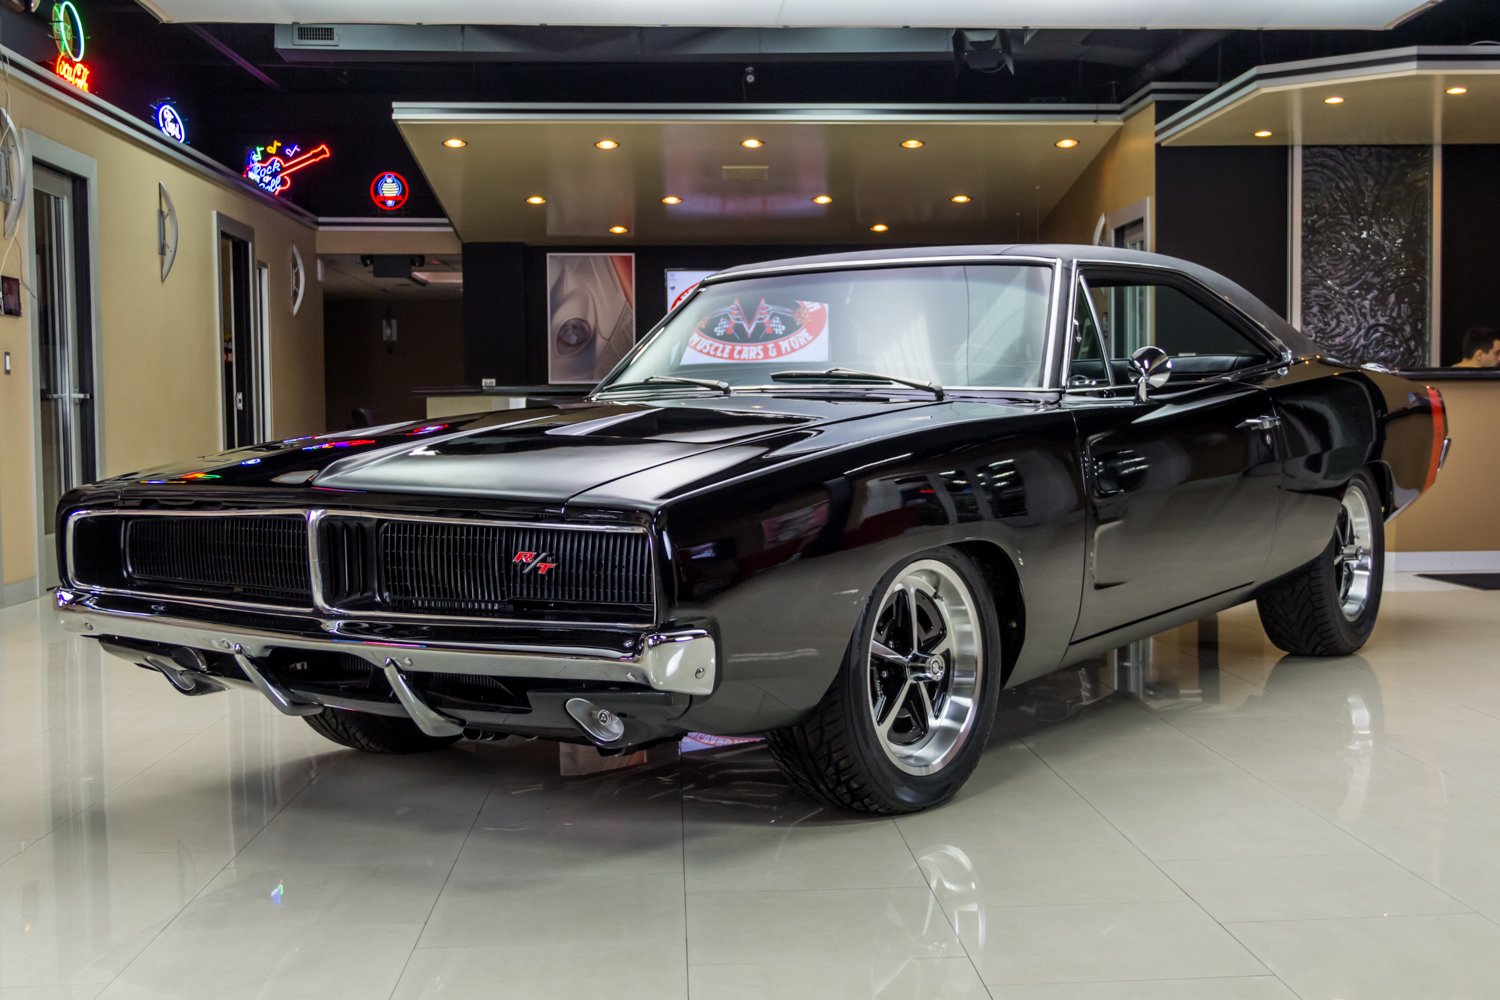 1969 Dodge Charger | Classic Cars for Sale Michigan: Muscle & Old Cars